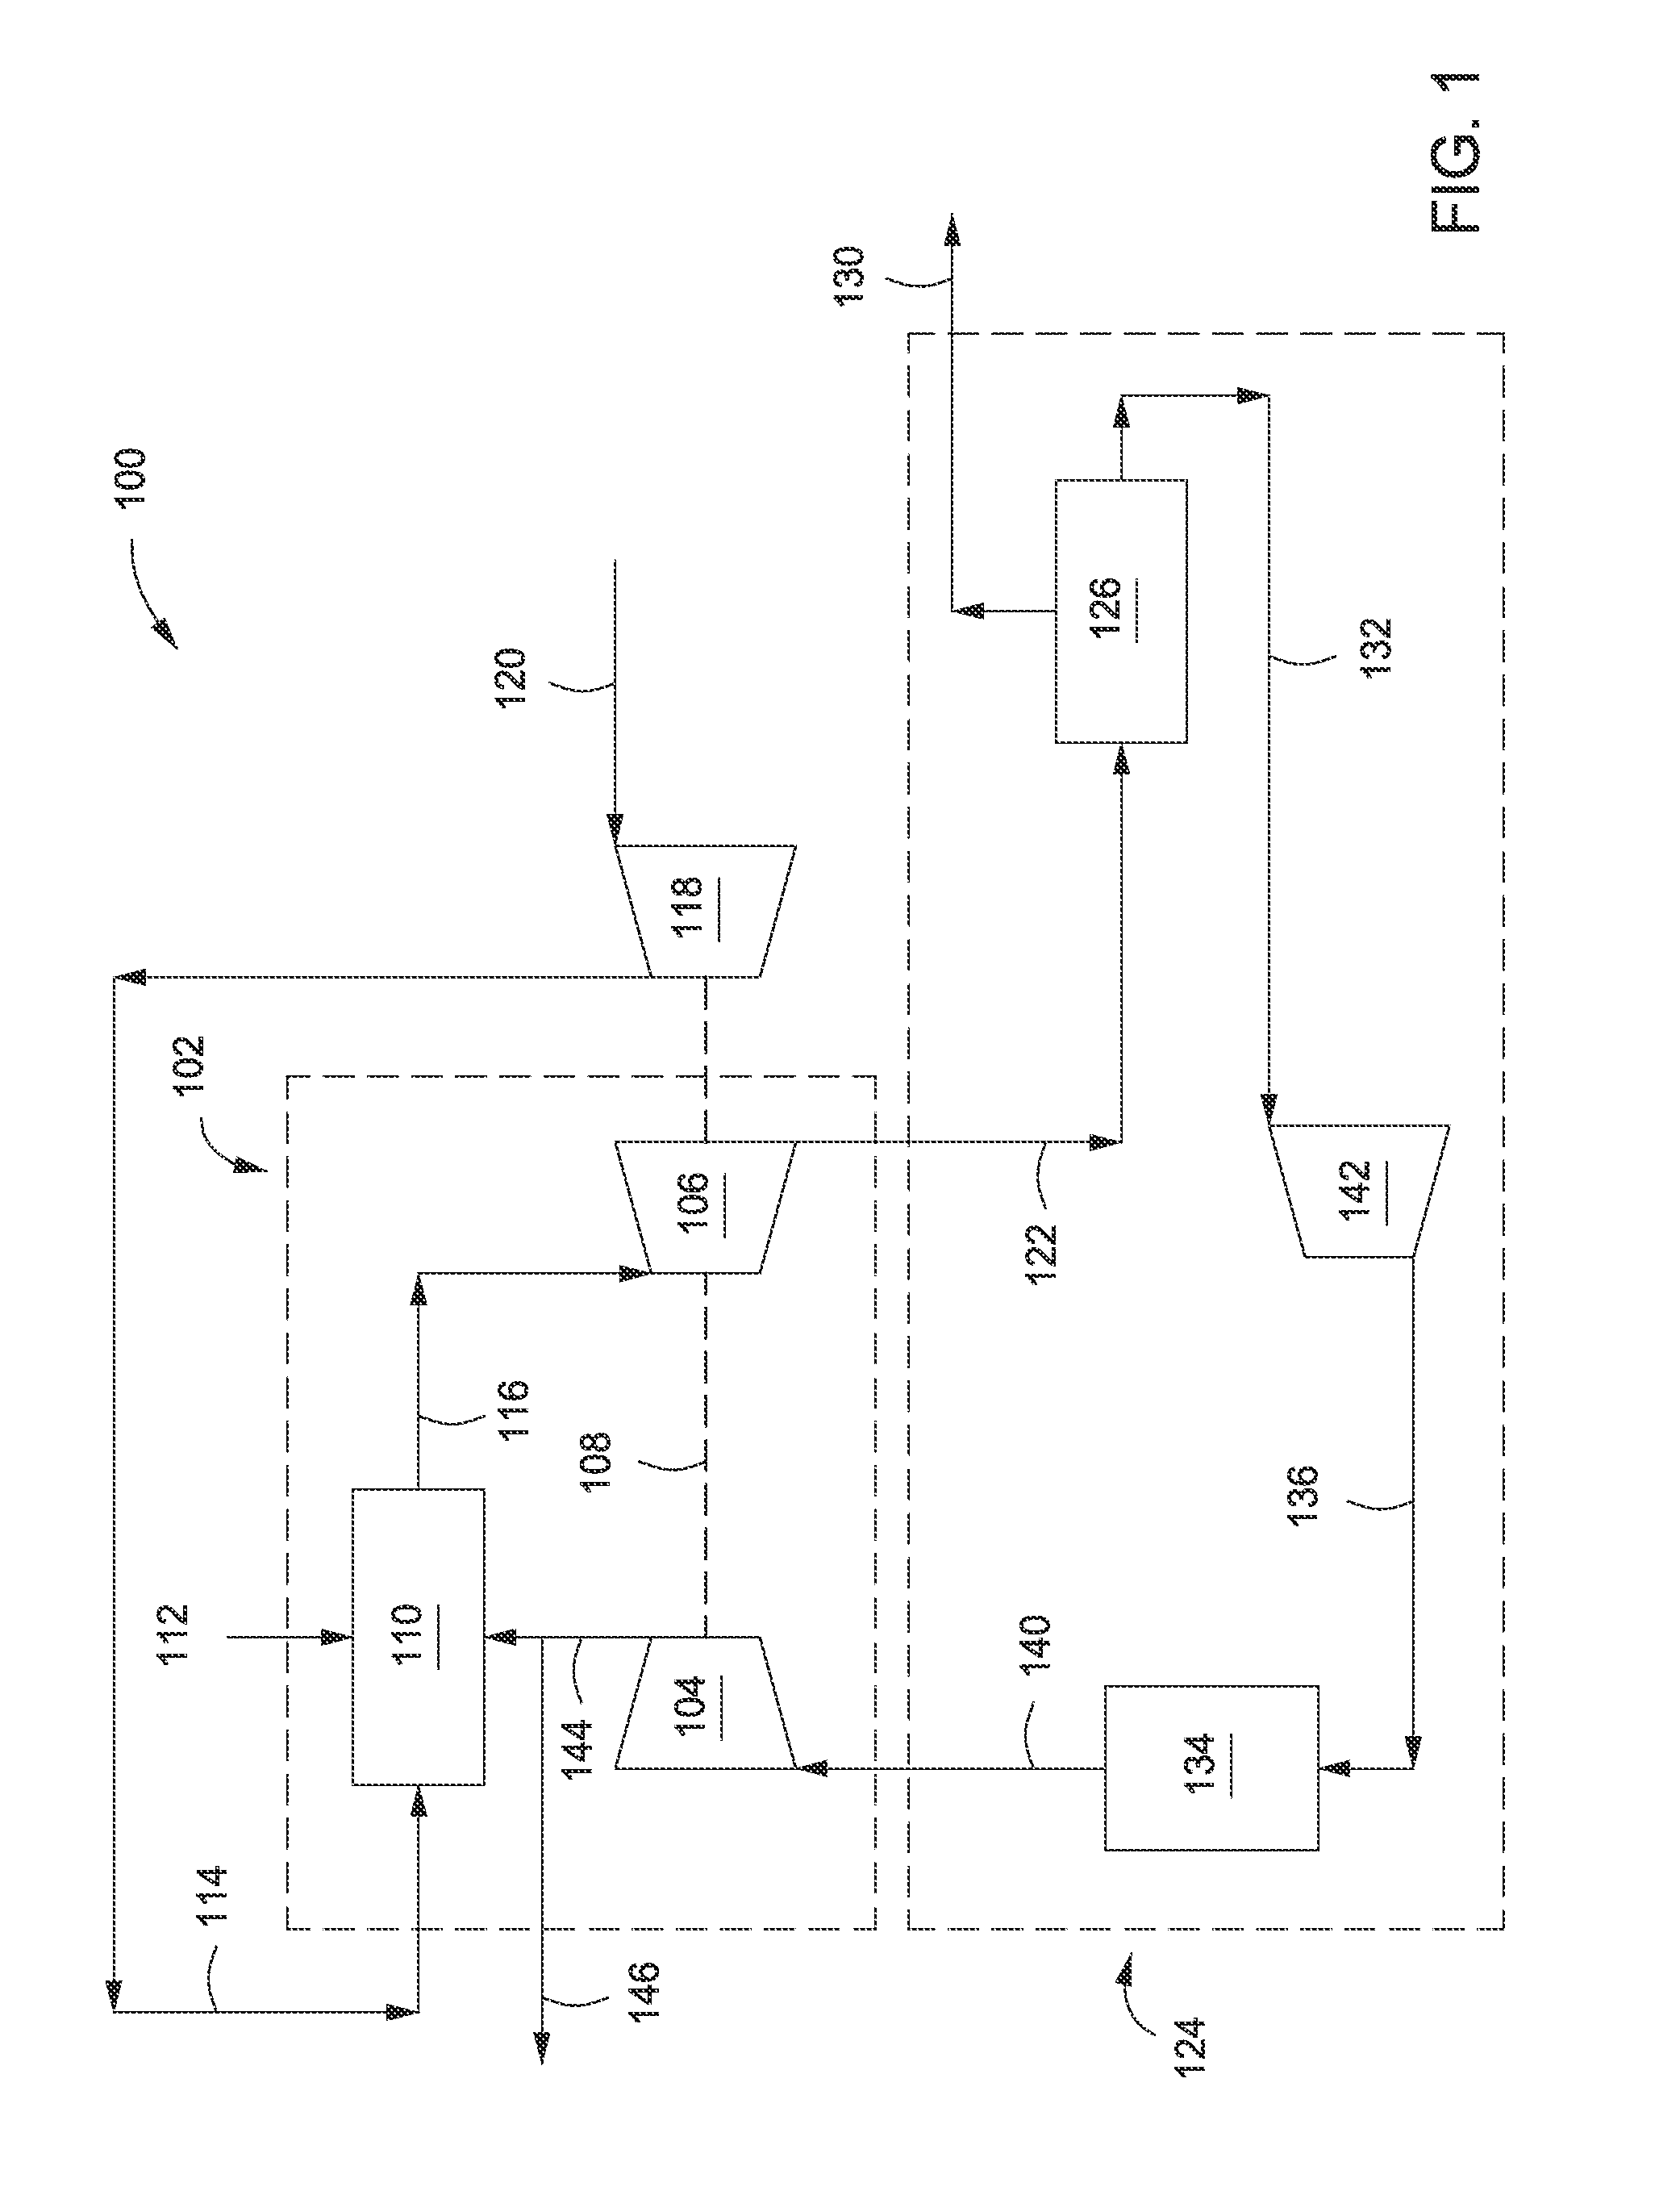 Systems and Methods For Controlling Stoichiometric Combustion In Low Emission Turbine Systems